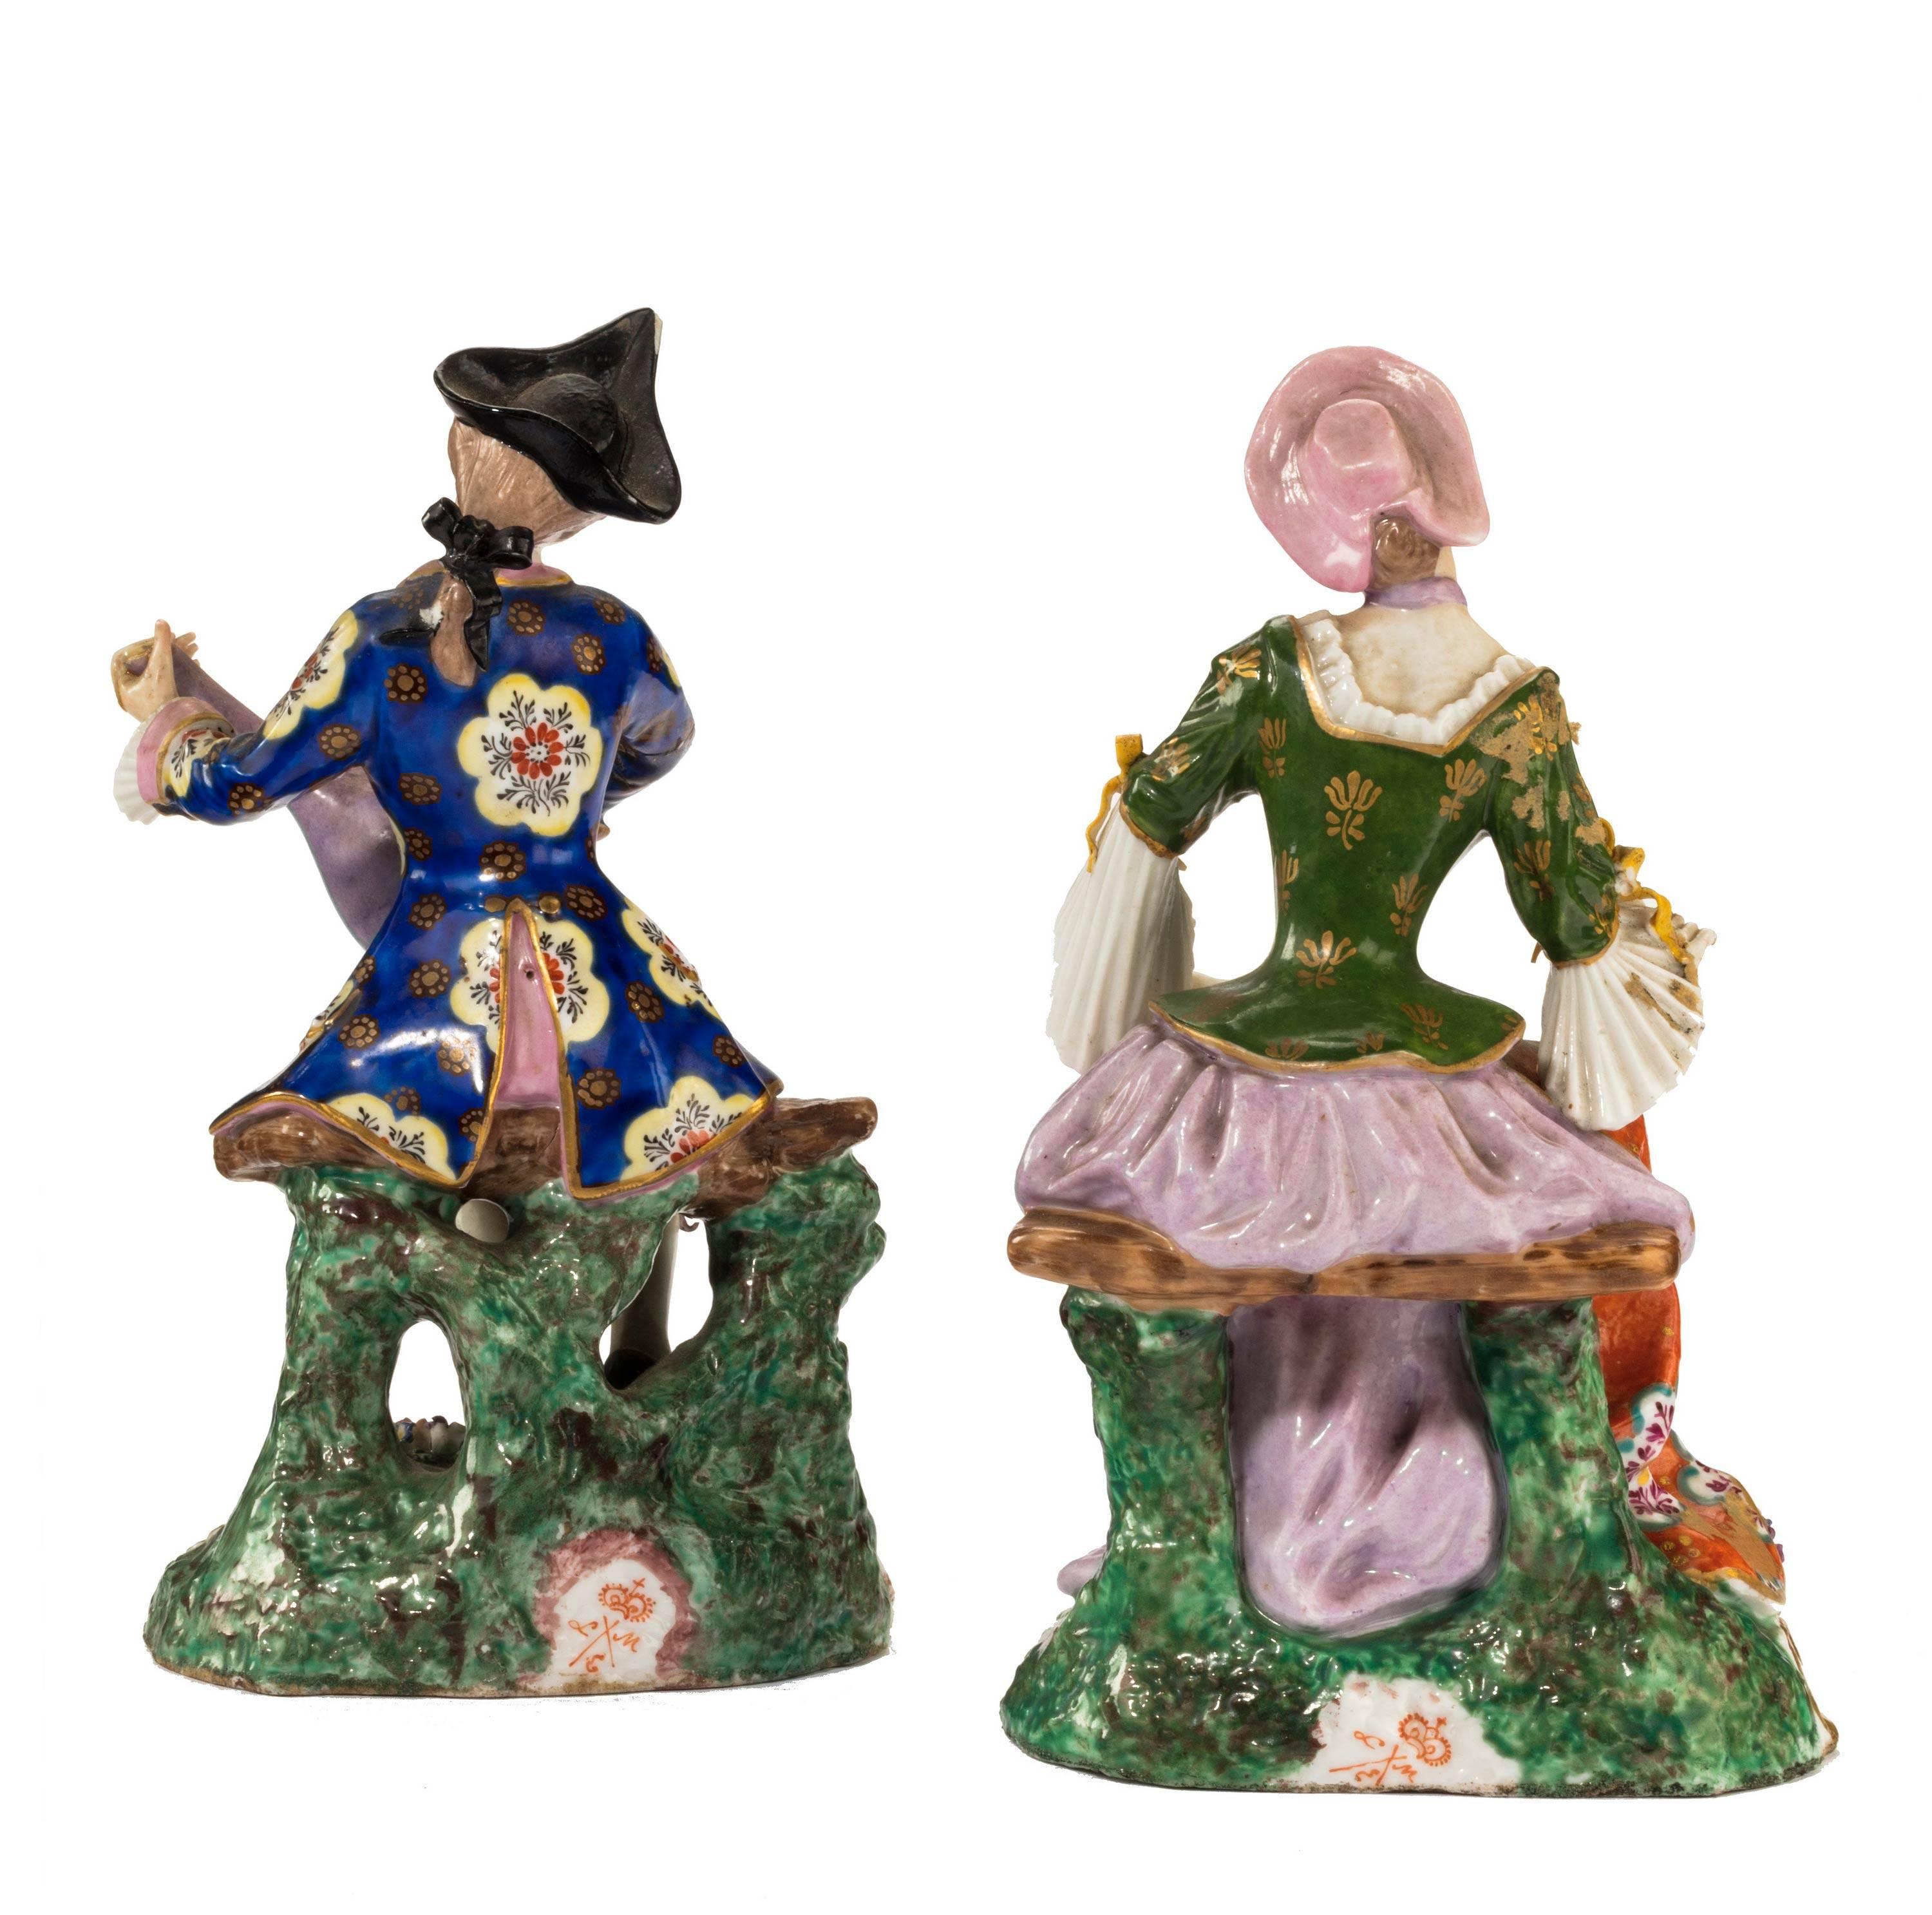 A pair of hard paste porcelain figures. Excellent overall condition, minor chips to a hand and a hat.

Smaller measures -

Height 6.5 inches
Width 4 inches
Depth 3.5 inches.